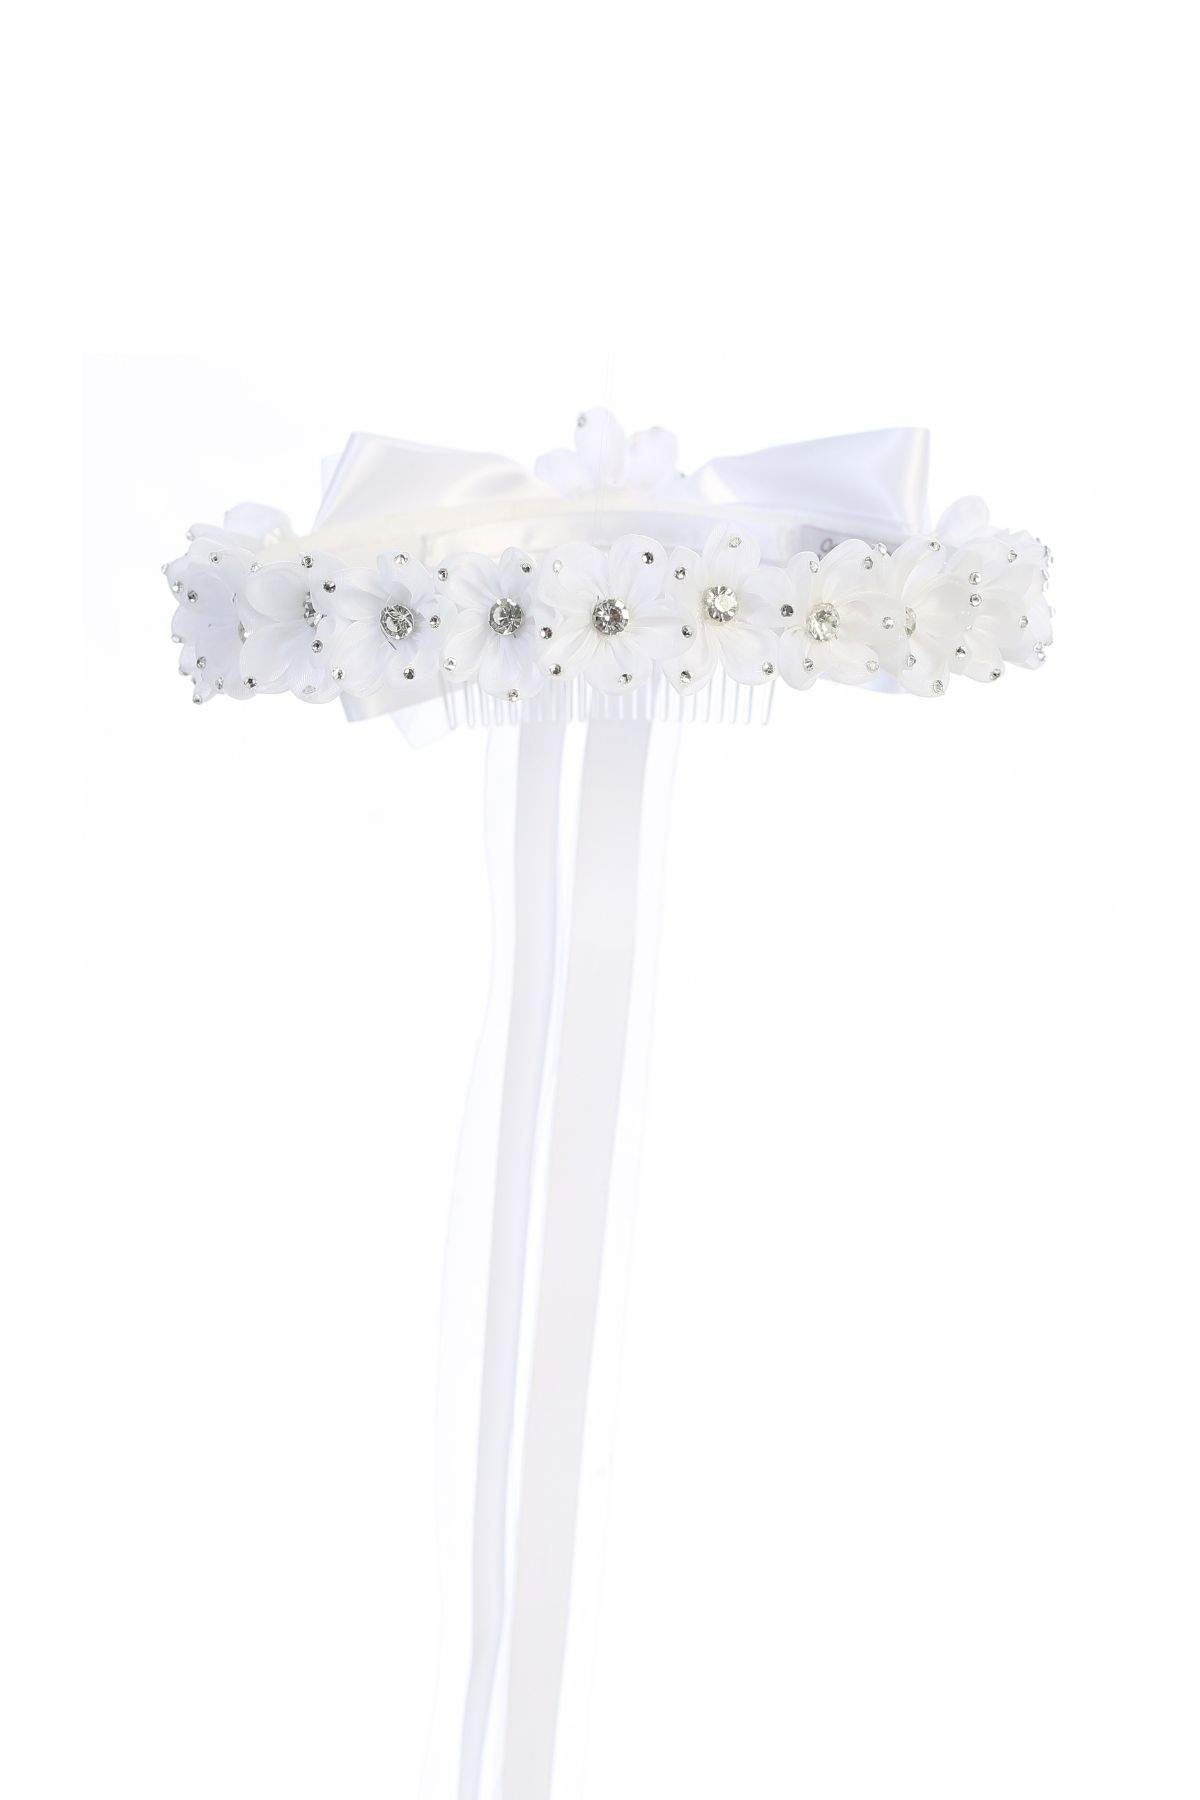 Gem Flower Crown-Kid's Dream-1_2,3_4,5_6,7_8,big_girl,color_White,fabric_Satin,little_girl,size_02,size_04,size_06,size_08,size_10,size_12,size_14